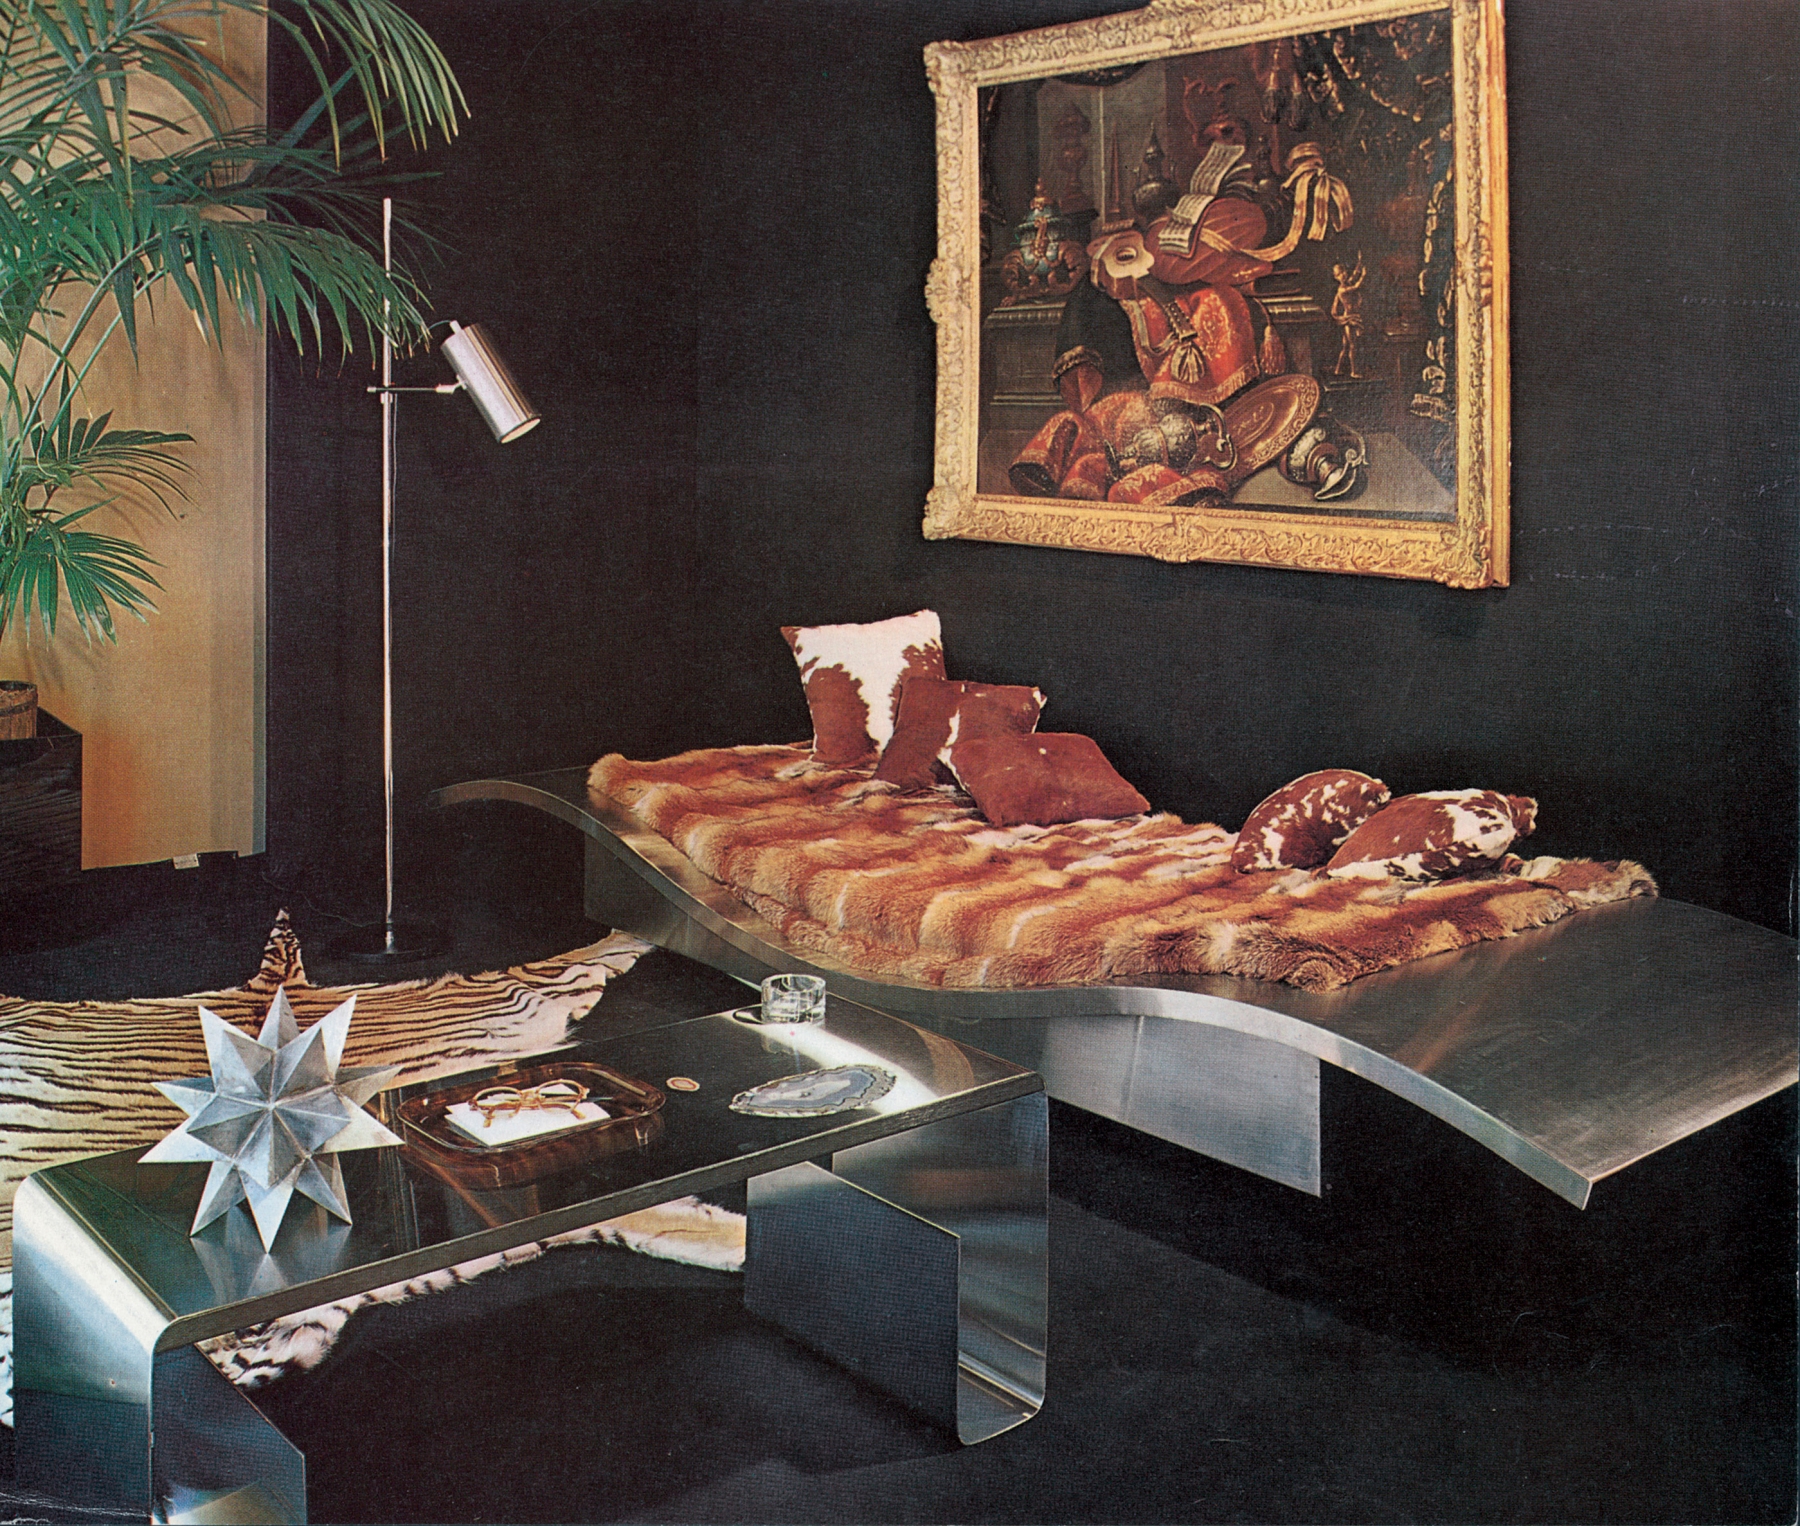 Flying Carpet Daybed and stainless-steel and amethyst low table at the Galerie Maison et Jardin in an&amp;nbsp;exhibition organized by Jean Dive, Paris, May 1968, reproduced in Plaisir de France, January 1969.